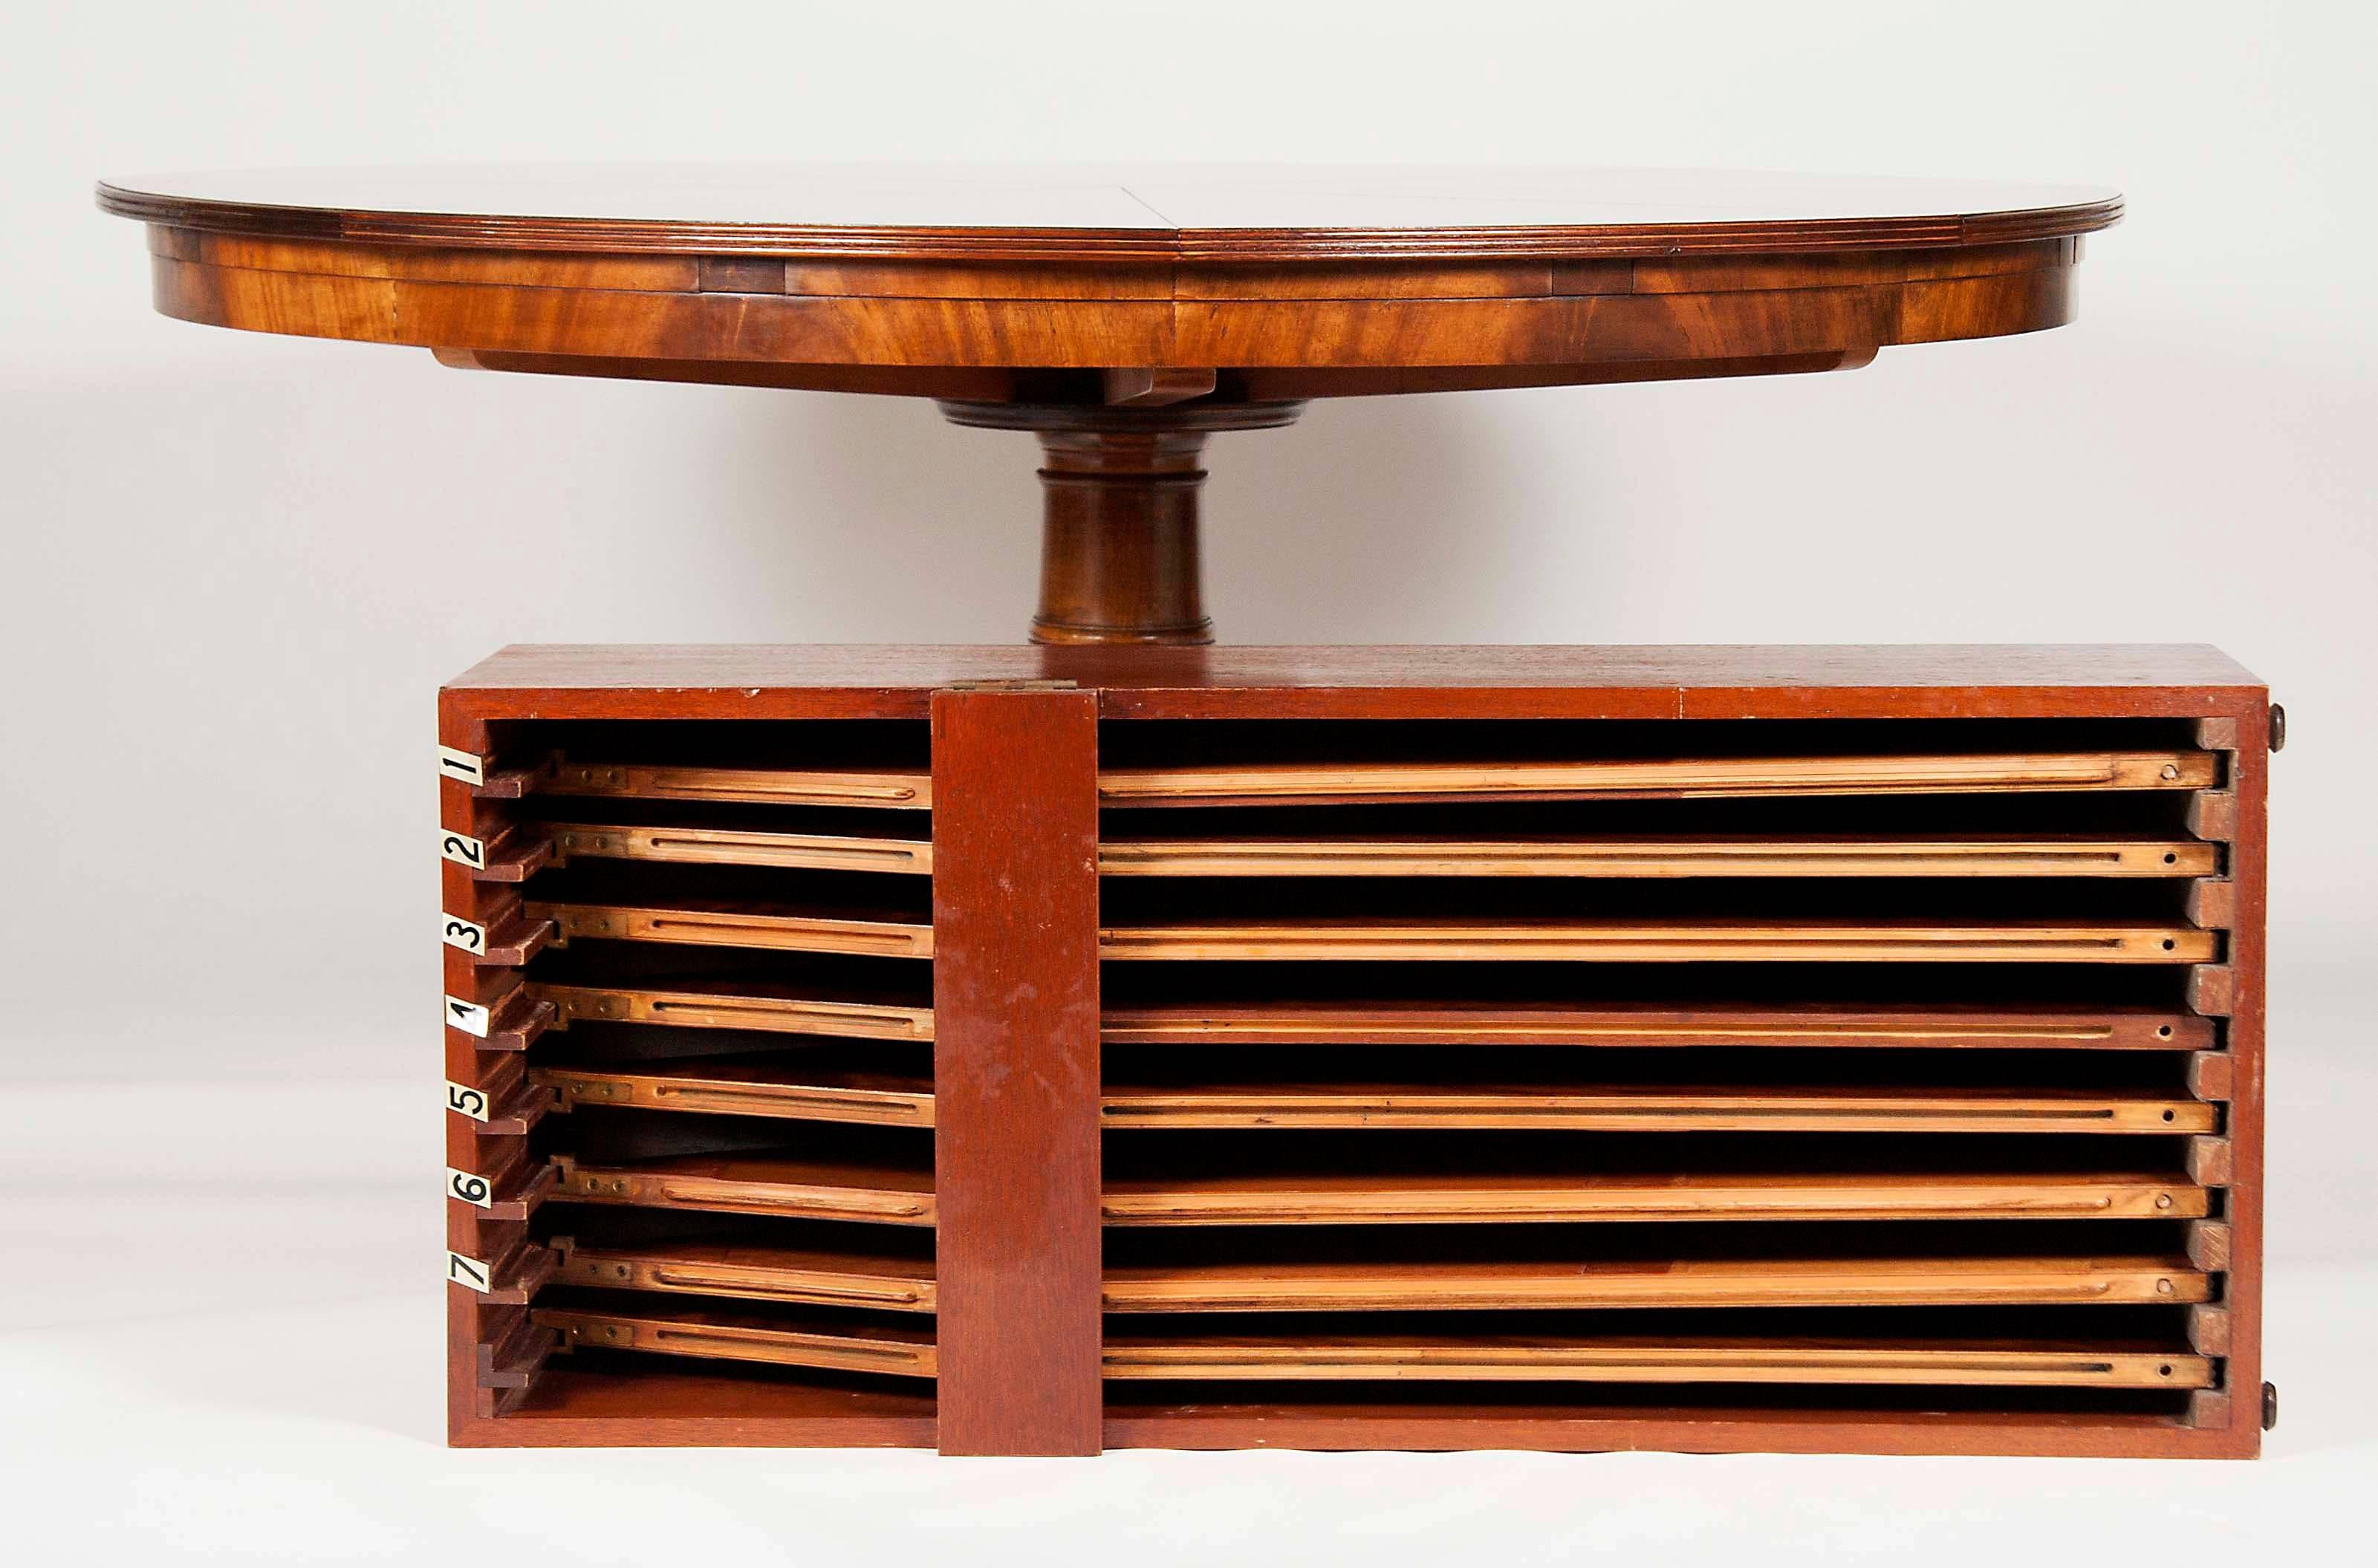 With figured mahogany top with a mechanism where you spin the table and it opens like a kaleidoscope and you insert leaves which enable the table to expand open circular, on a turned support raised on four saber legs ending on brass caps. Includes